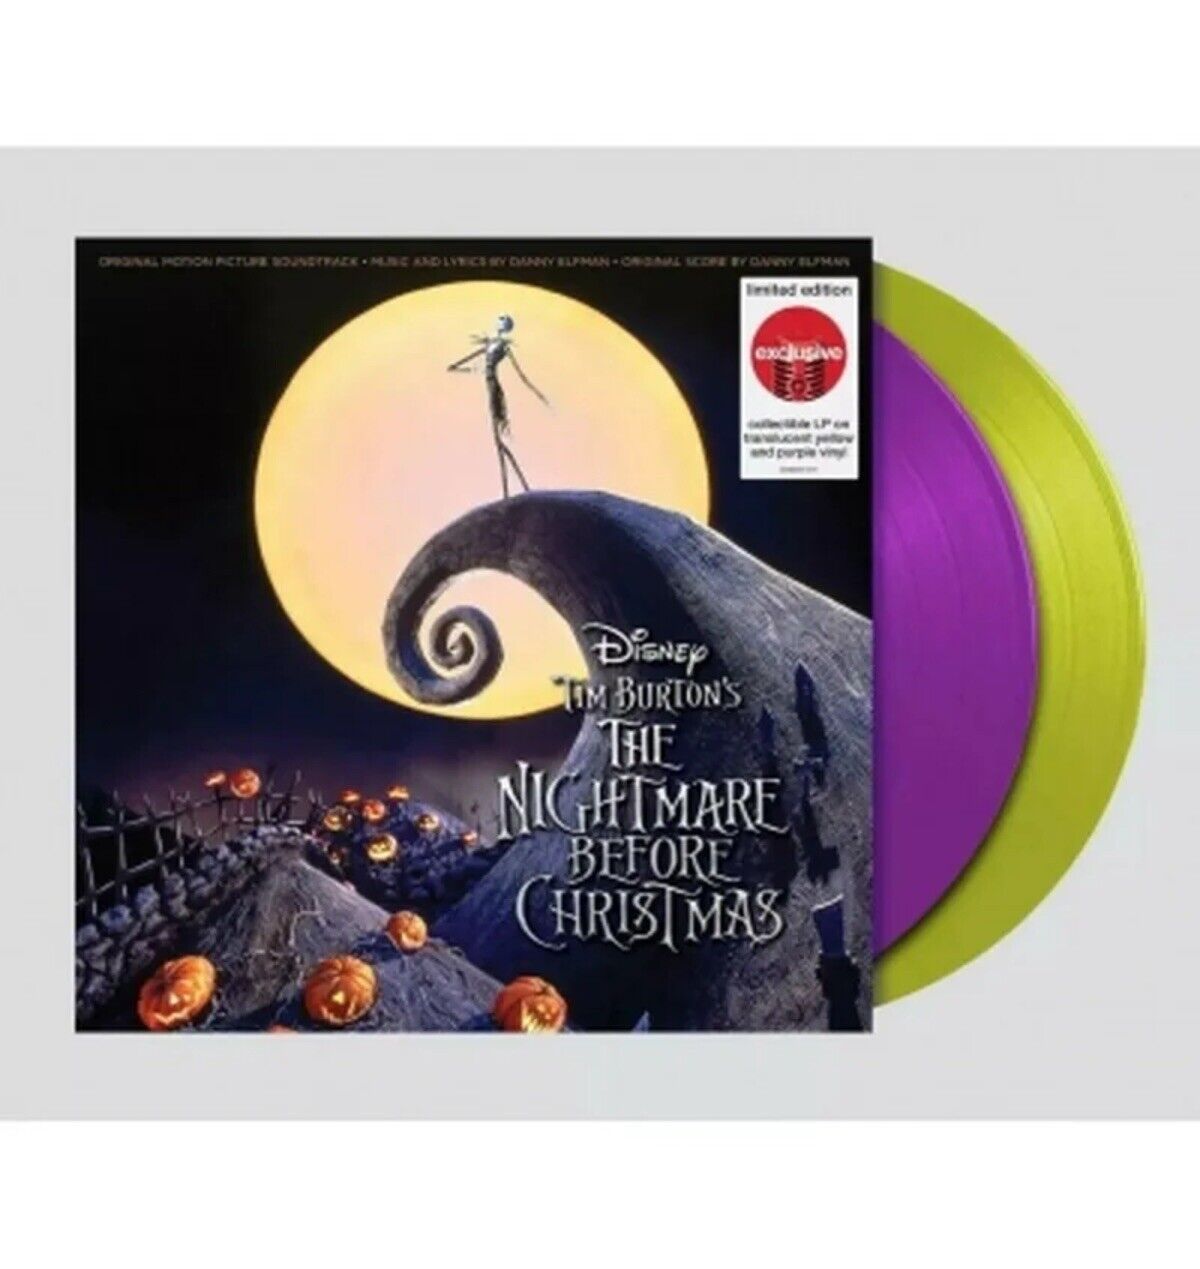 The Nightmare Before Christmas (Limited Edition, Yellow/Purple Vinyl 2 LP) USED